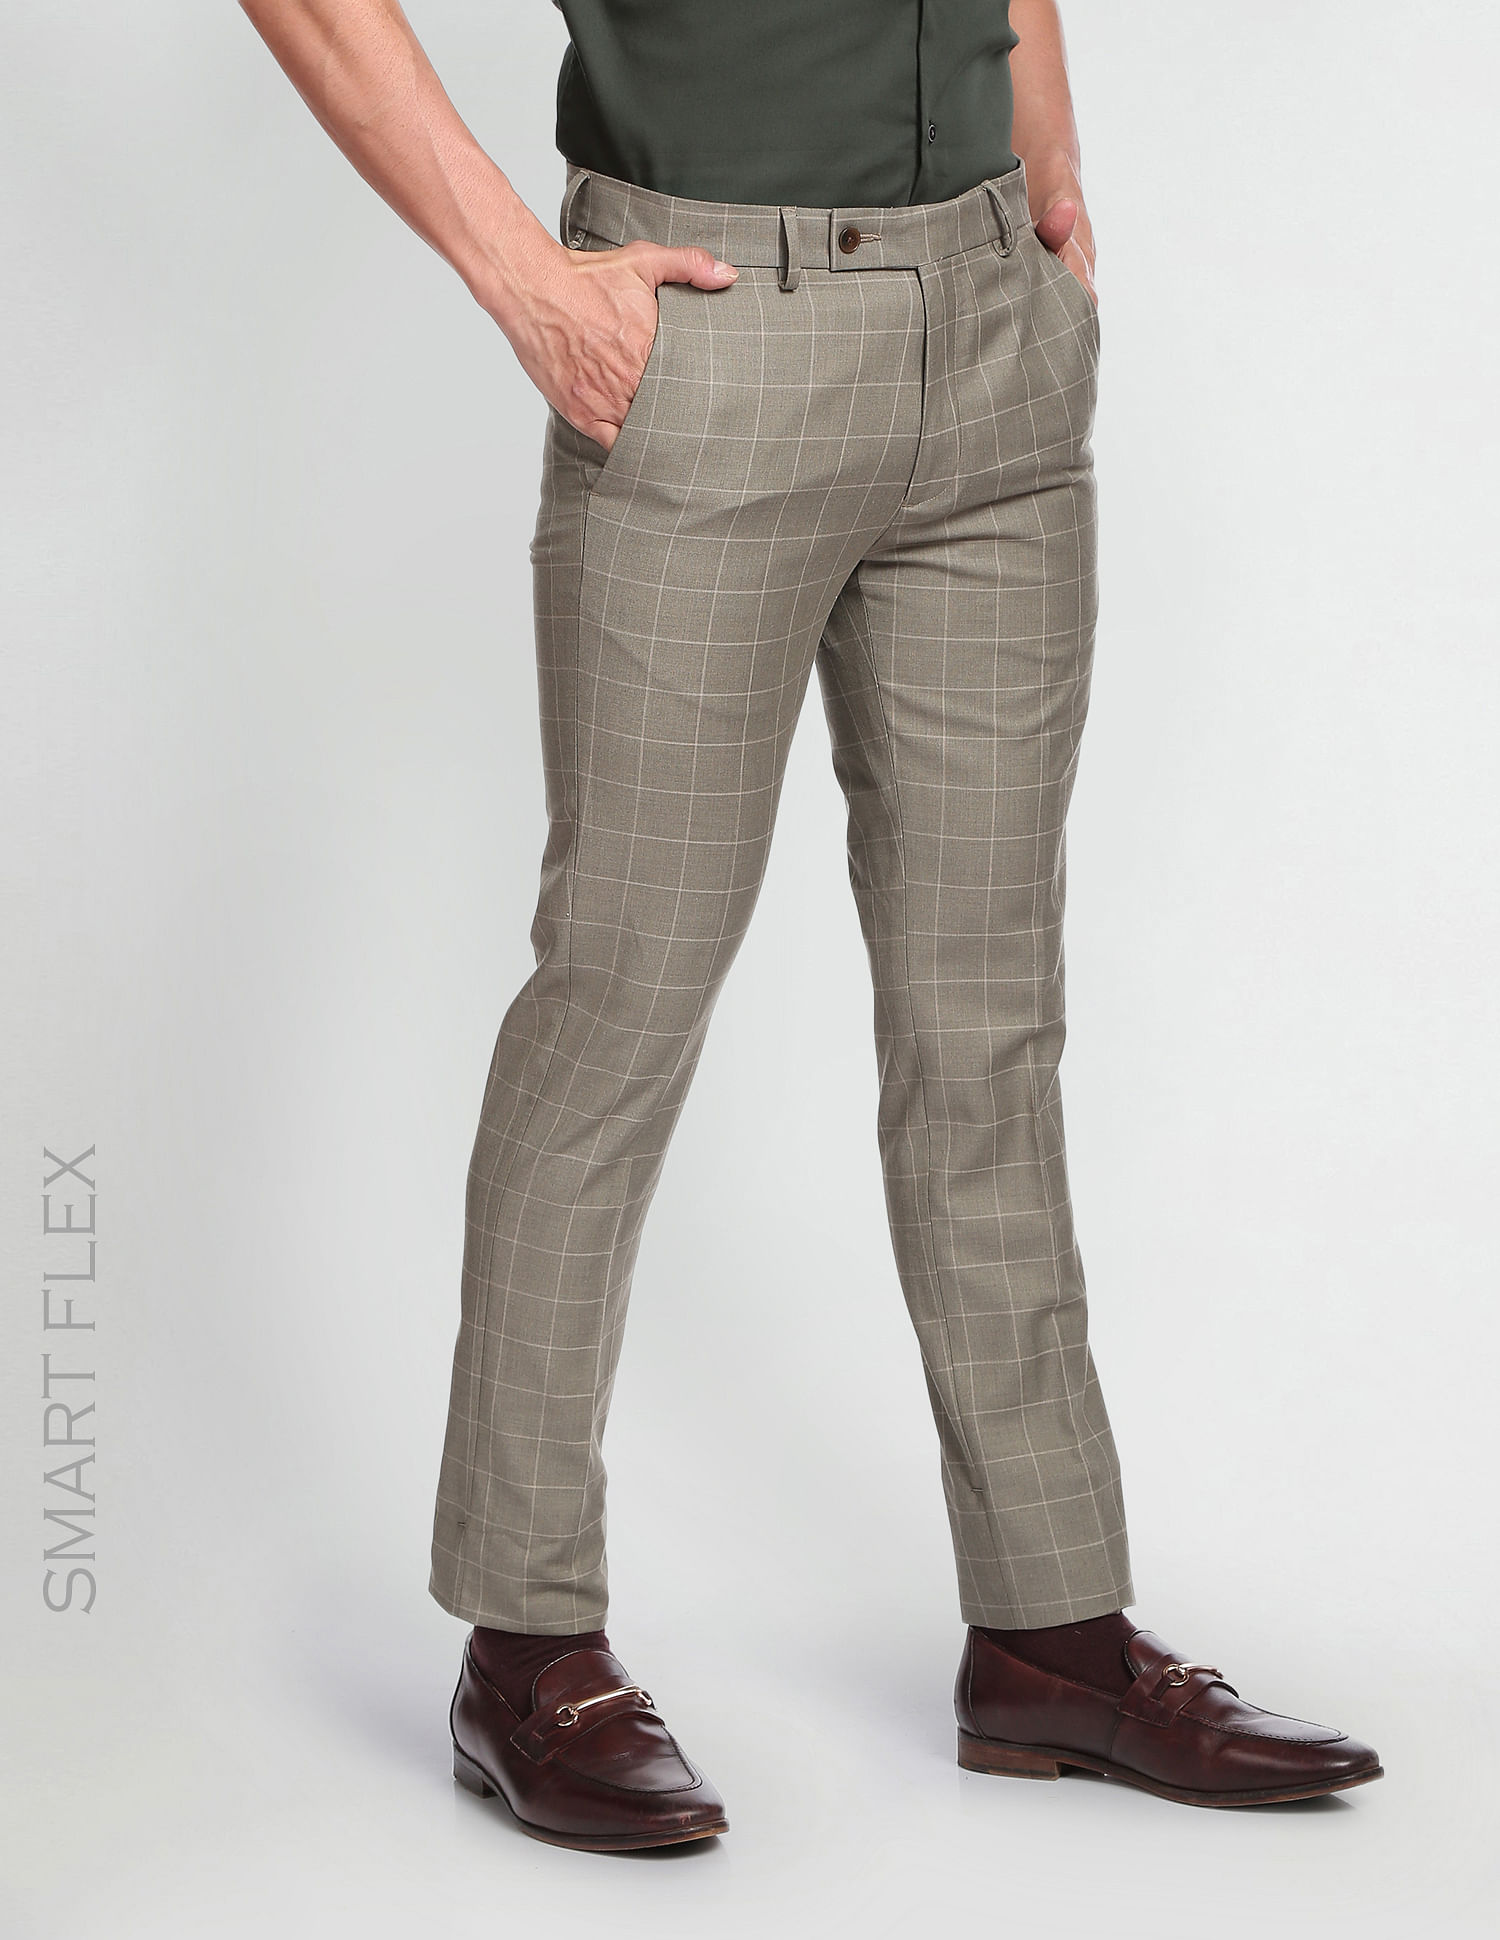 Crochet Grey Coloured Soft And Comfortable Checked Pattern Formal Pants For  Men at Best Price in Lucknow | Hindustan Garments